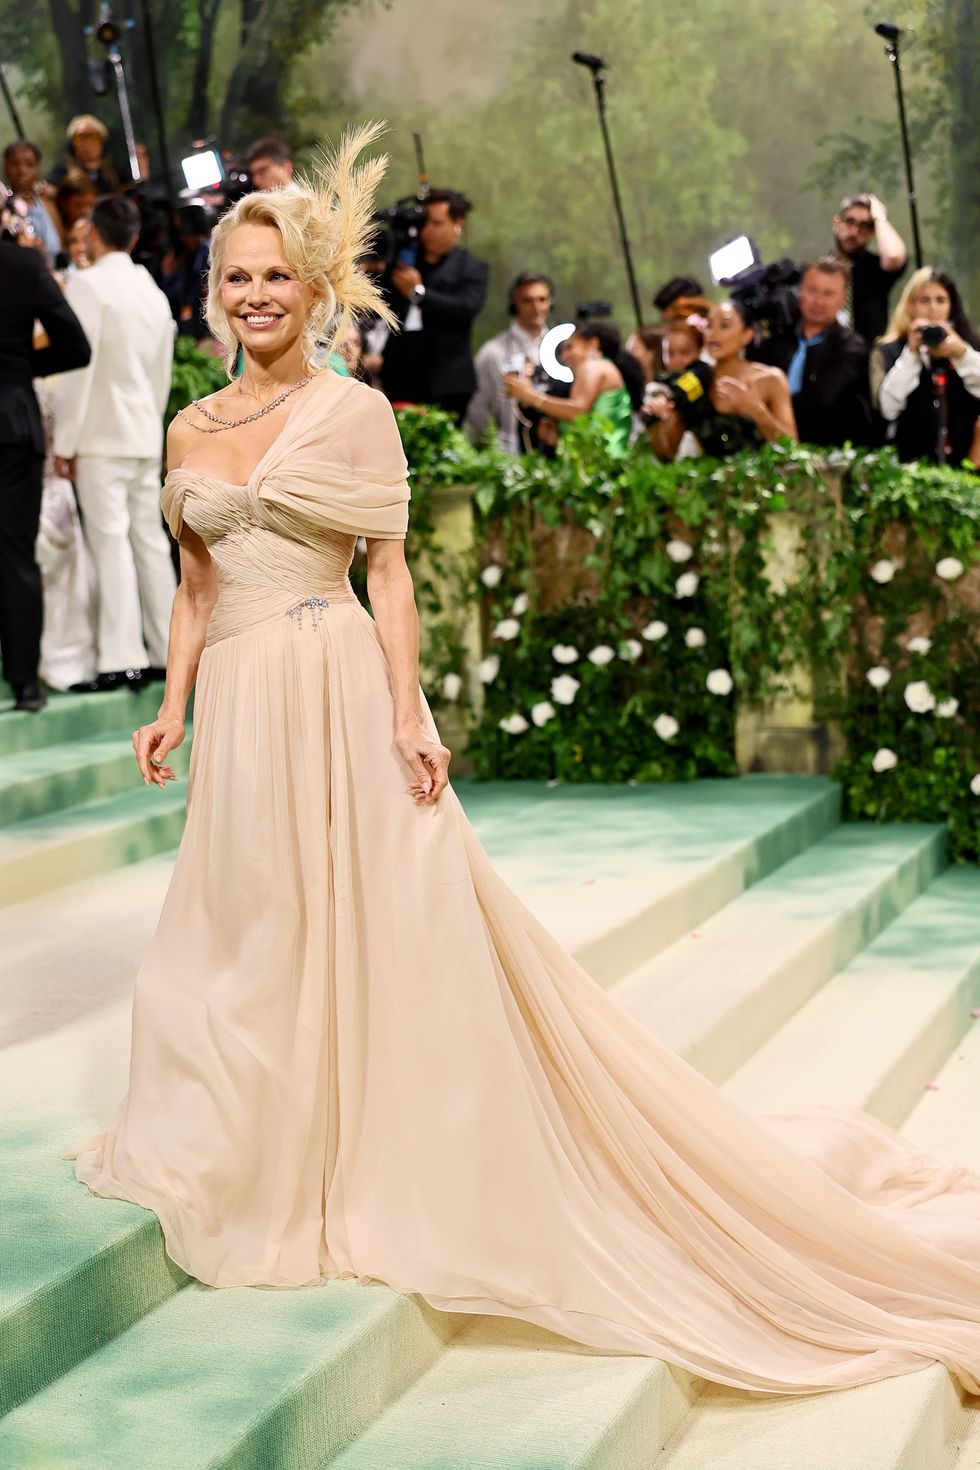 new york, new york may 06 pamela anderson attends the 2024 met gala celebrating sleeping beauties reawakening fashion at the metropolitan museum of art on may 06, 2024 in new york city photo by theo wargogathe hollywood reporter via getty images